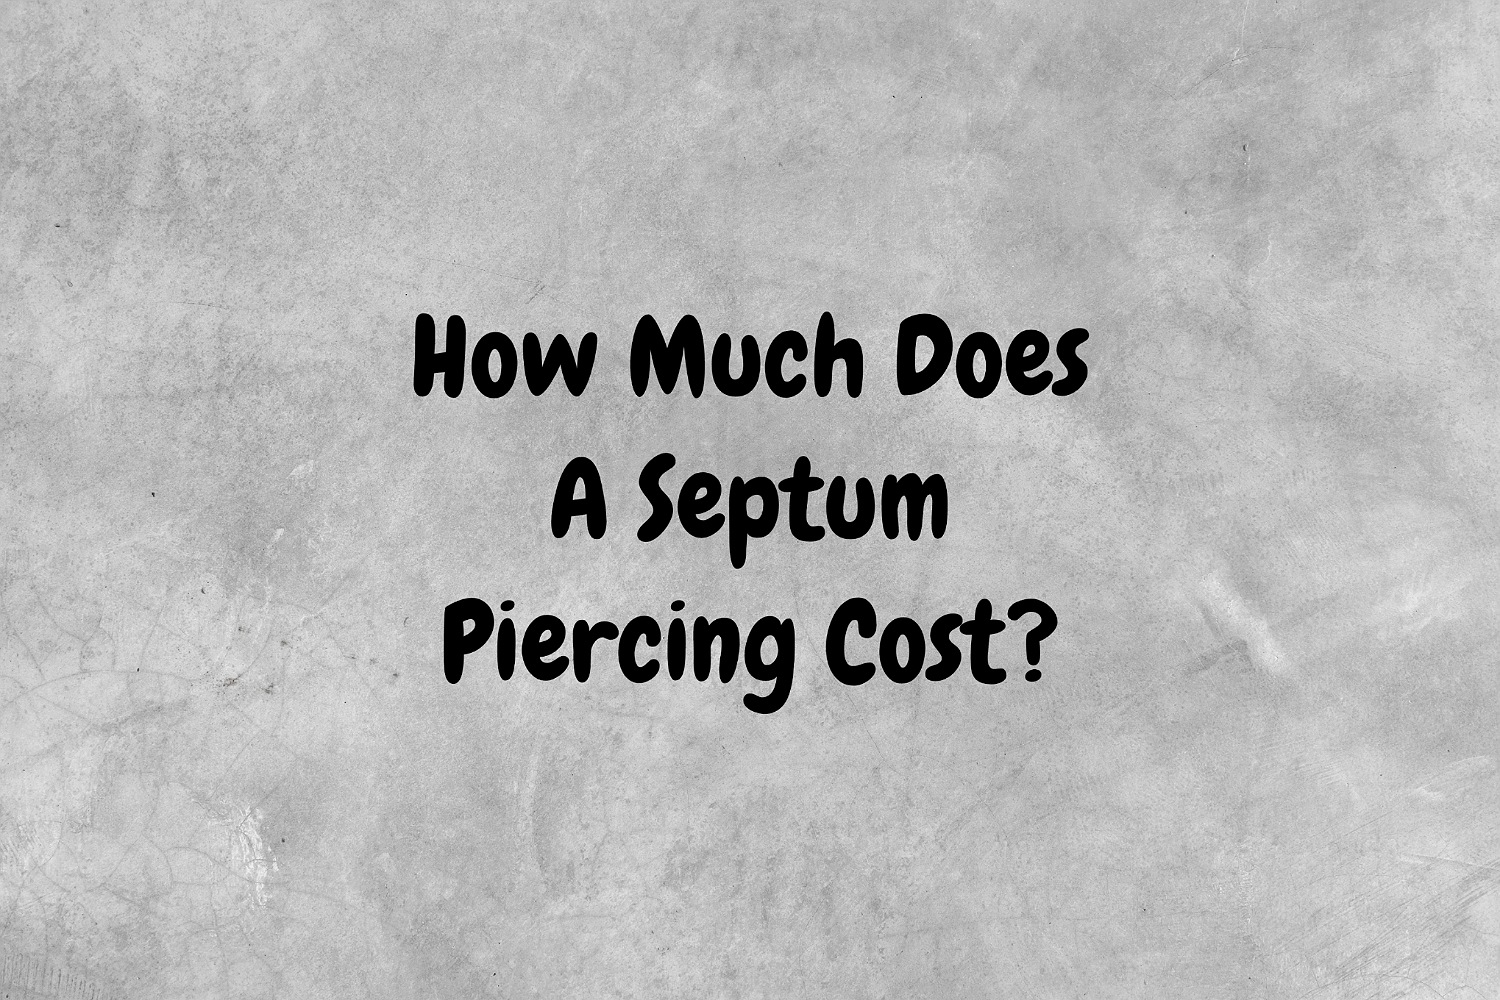 An image with a gray background and black text that proposes the question, "How much does a septum piercing cost?".